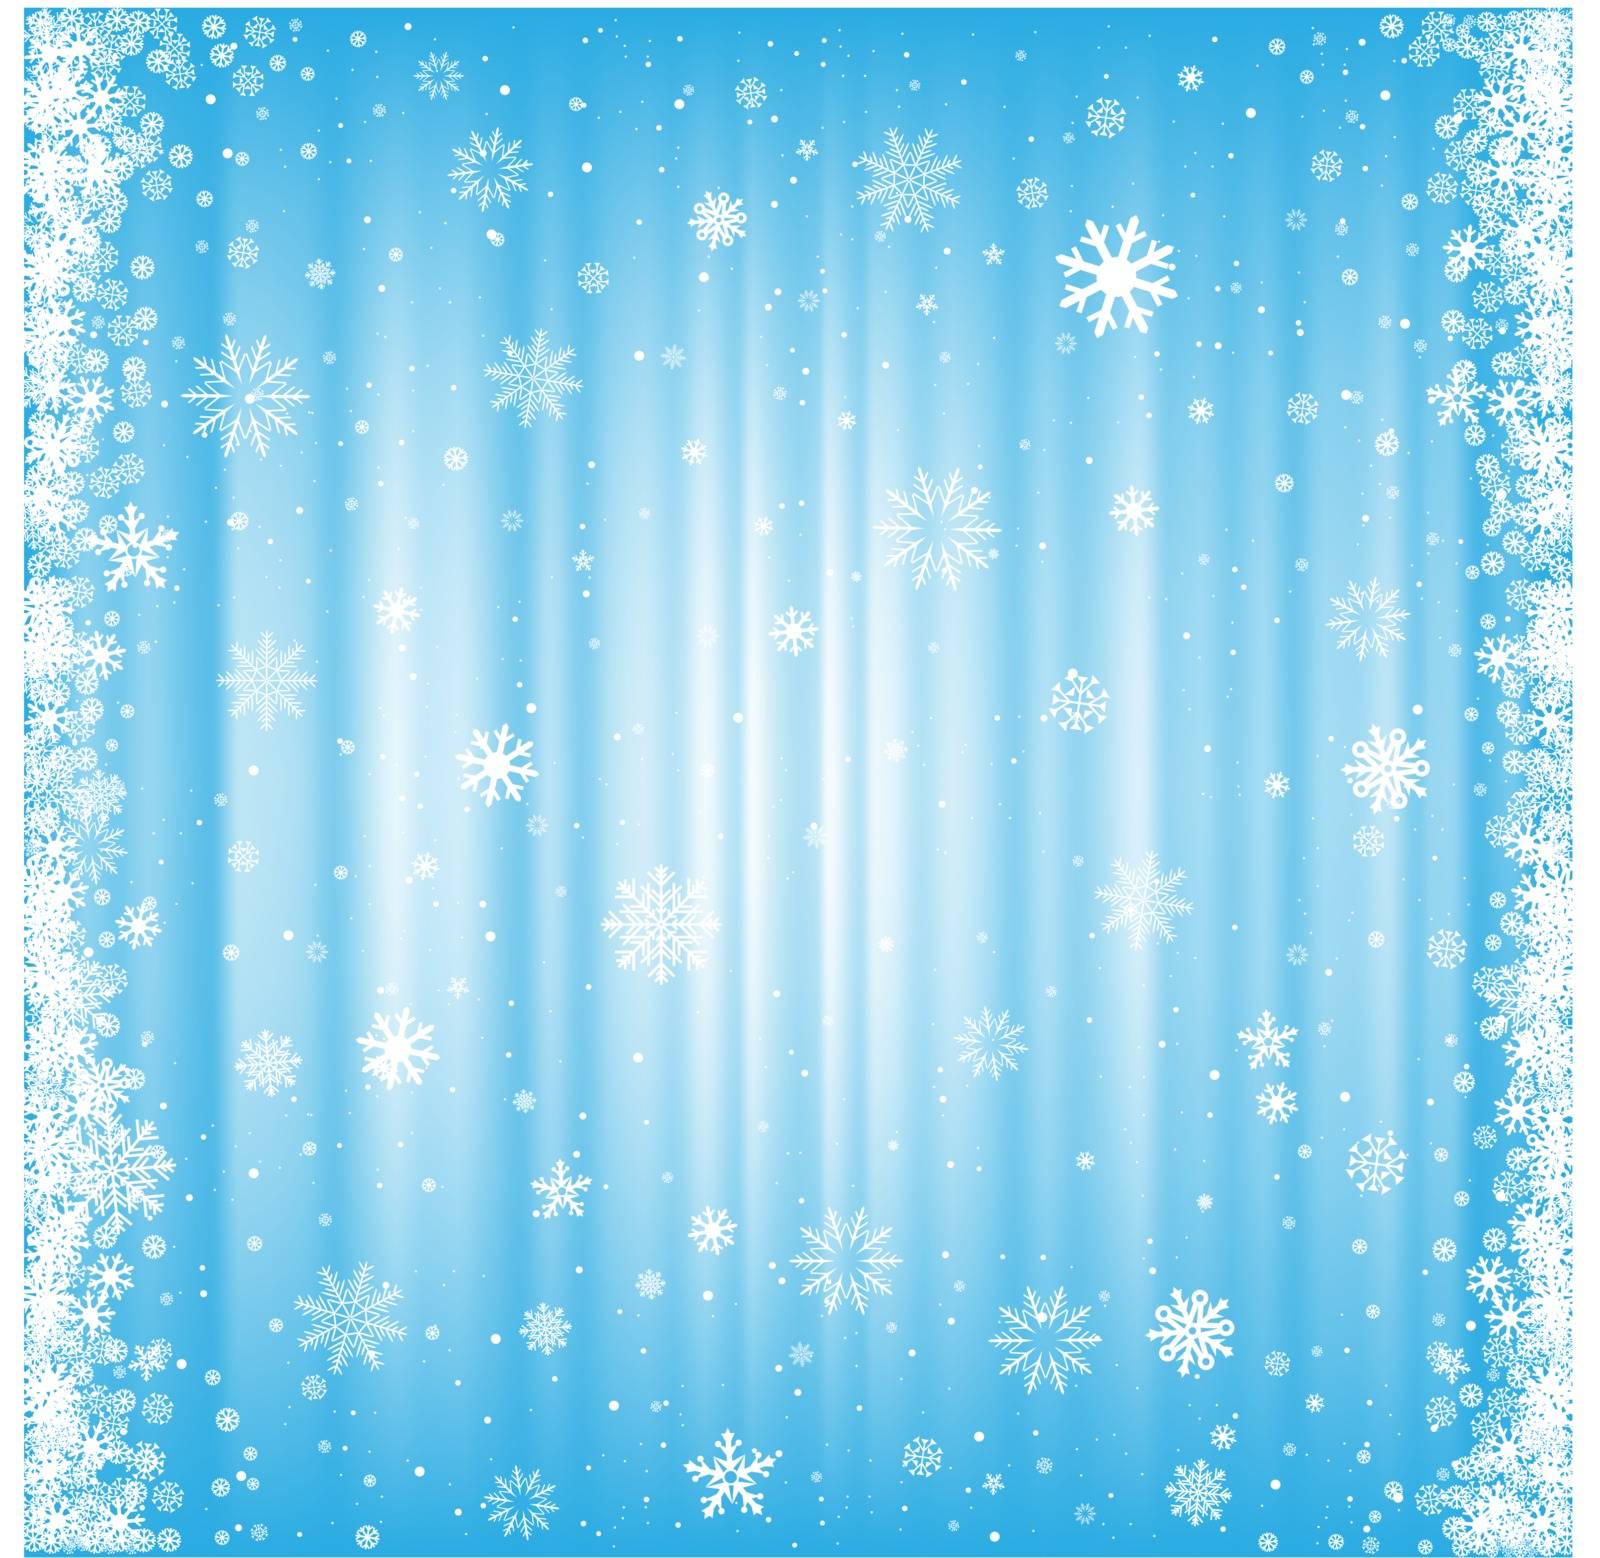 The falling snow on the blue striped mesh background